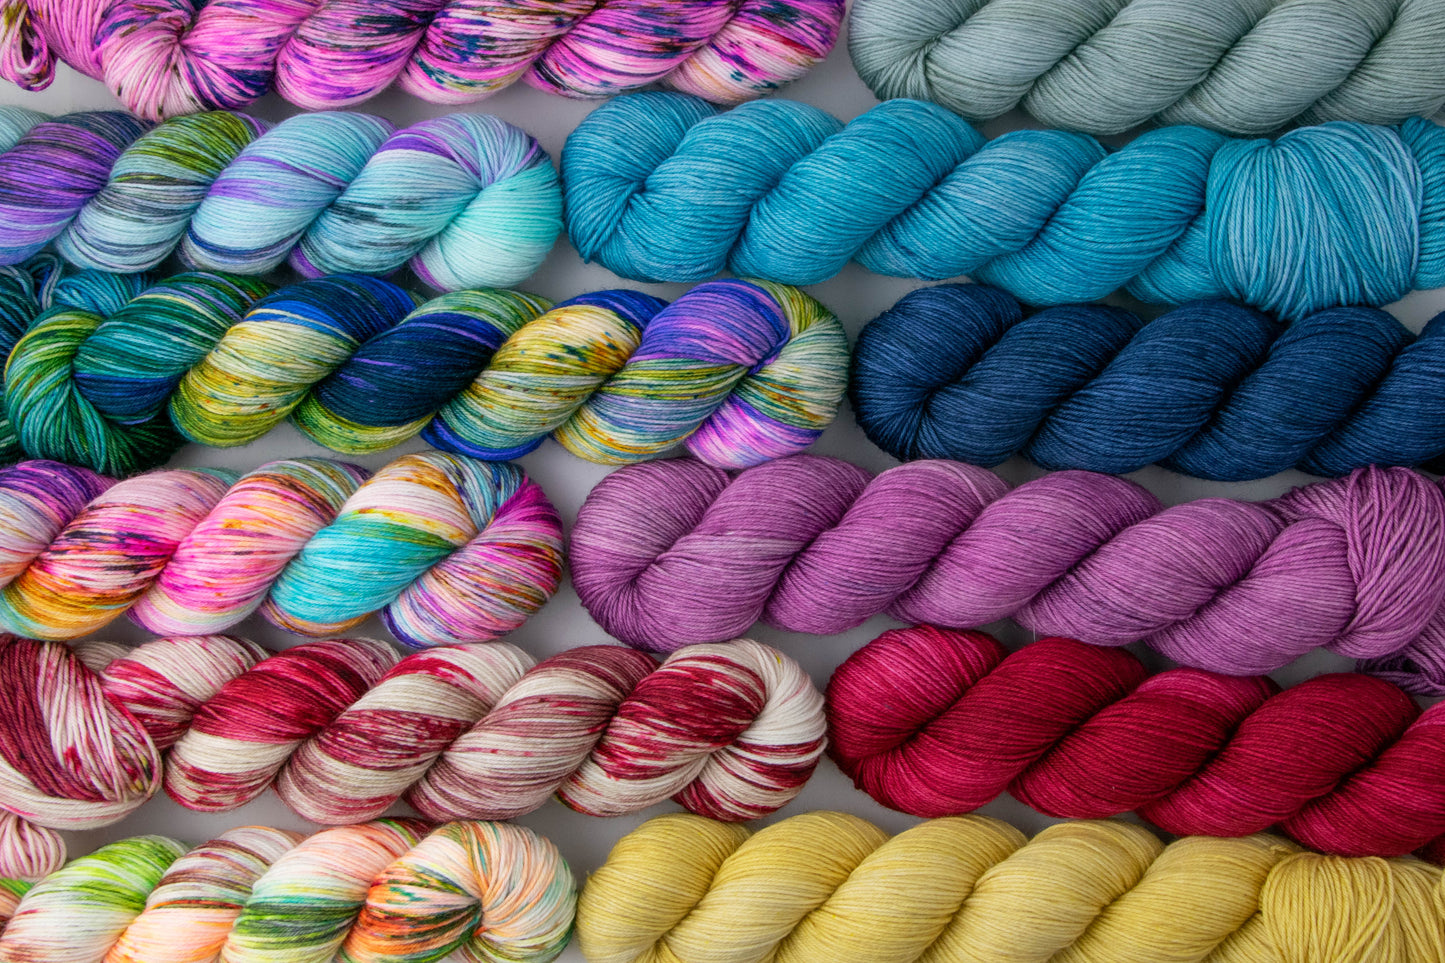 Each colorway in the Mamma Mia collection lined up in a grid.